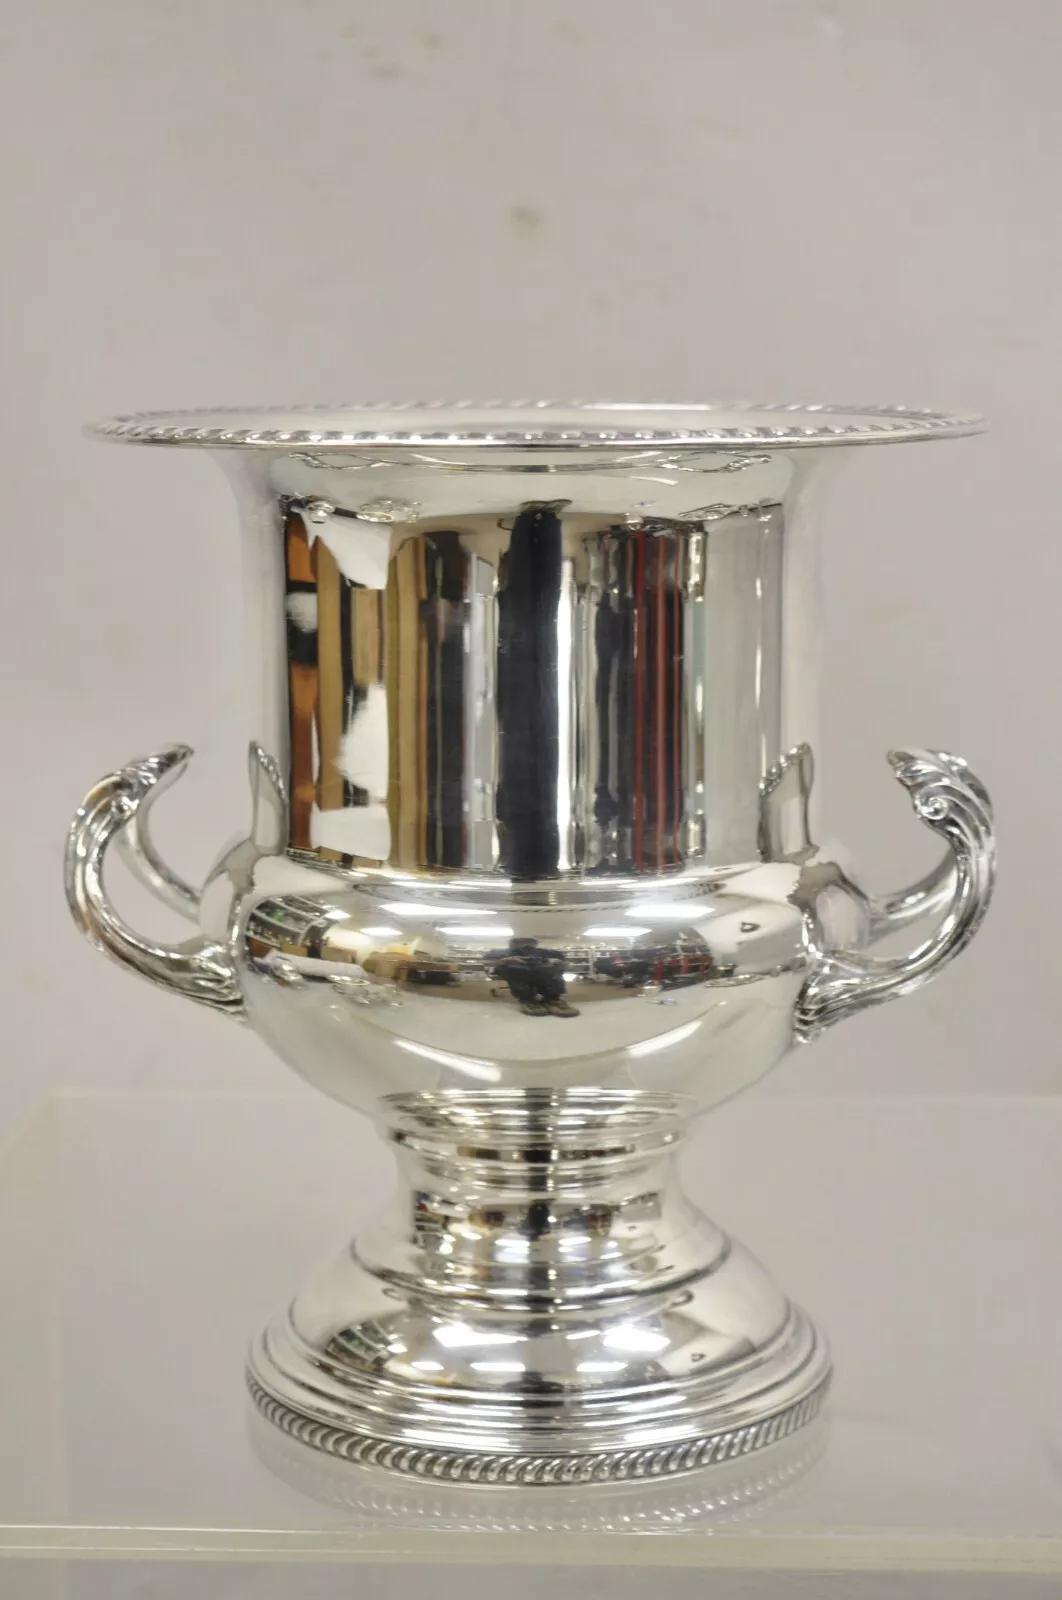 Vintage Victorian Style Trophy Cup Silver Plated Champagne Chiller Ice Bucket. Circa Mid 20th Century. Measurements: 10